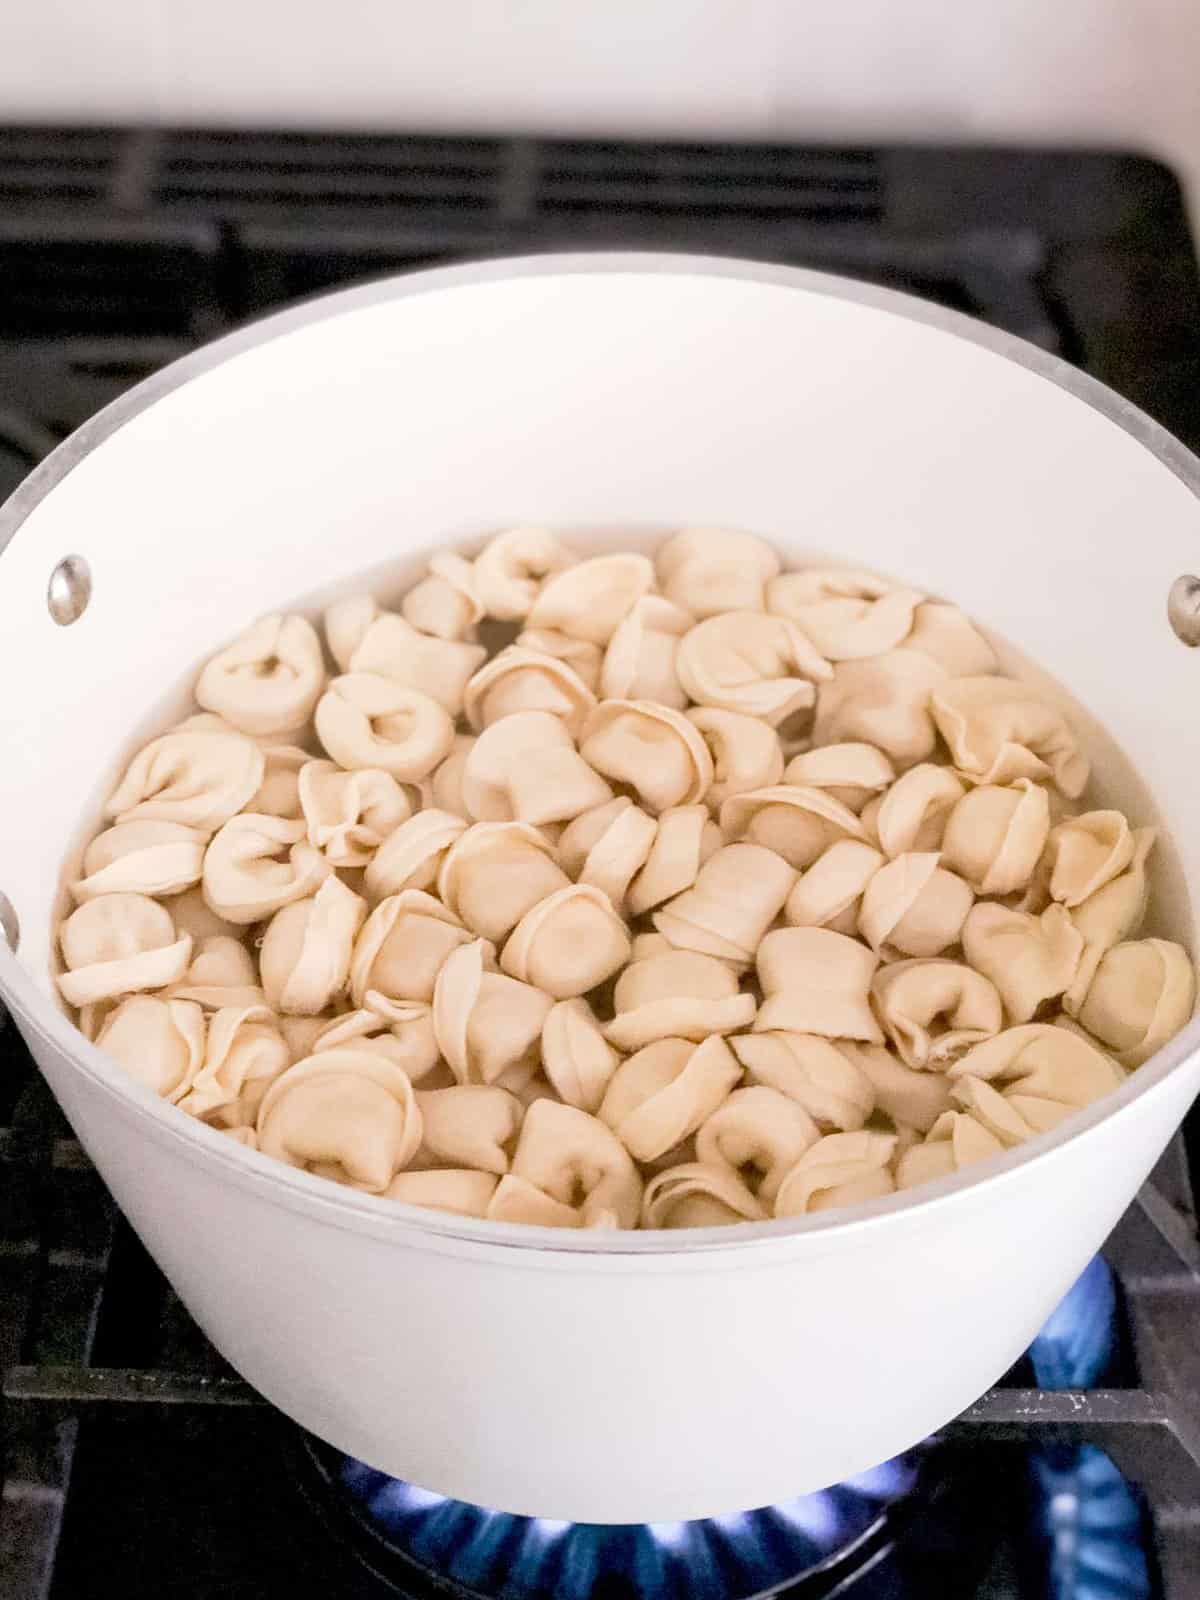 Chicken tortellini cooking on a stove.